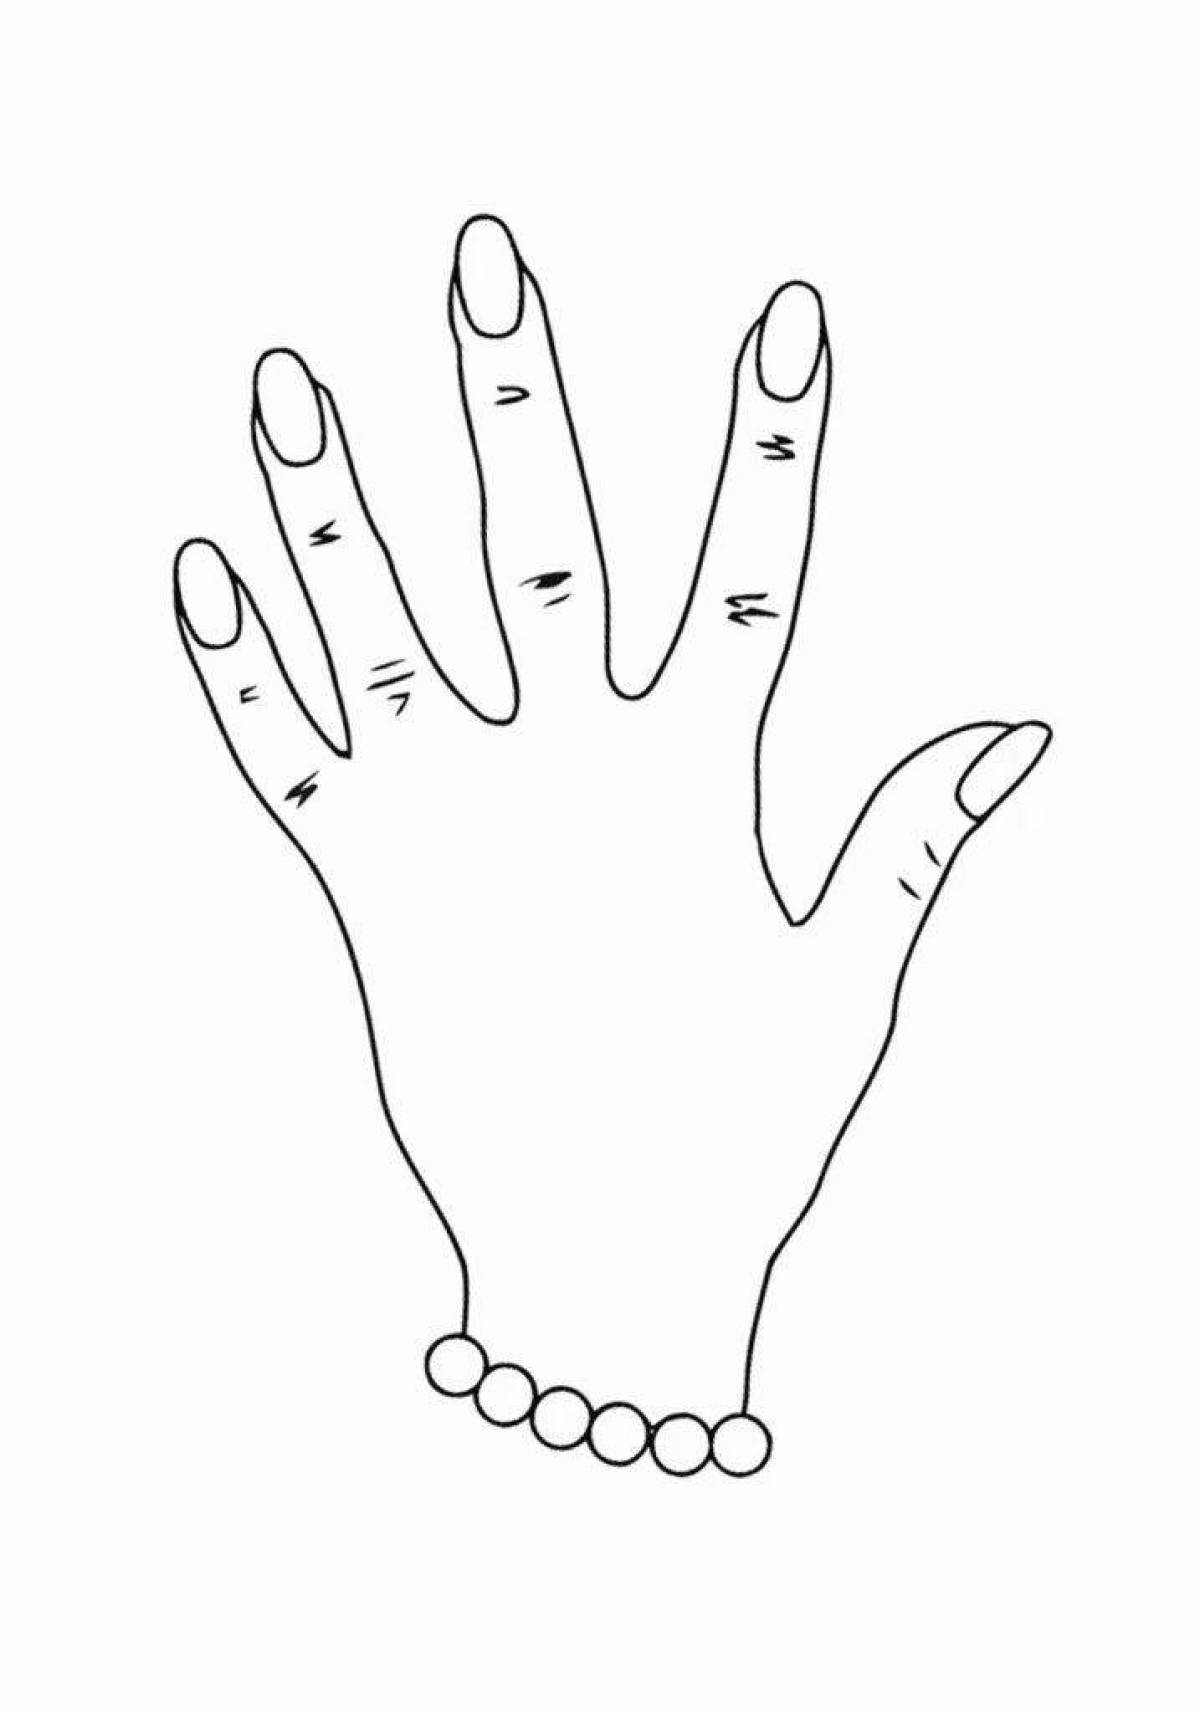 Coloring page shock hand with long nails